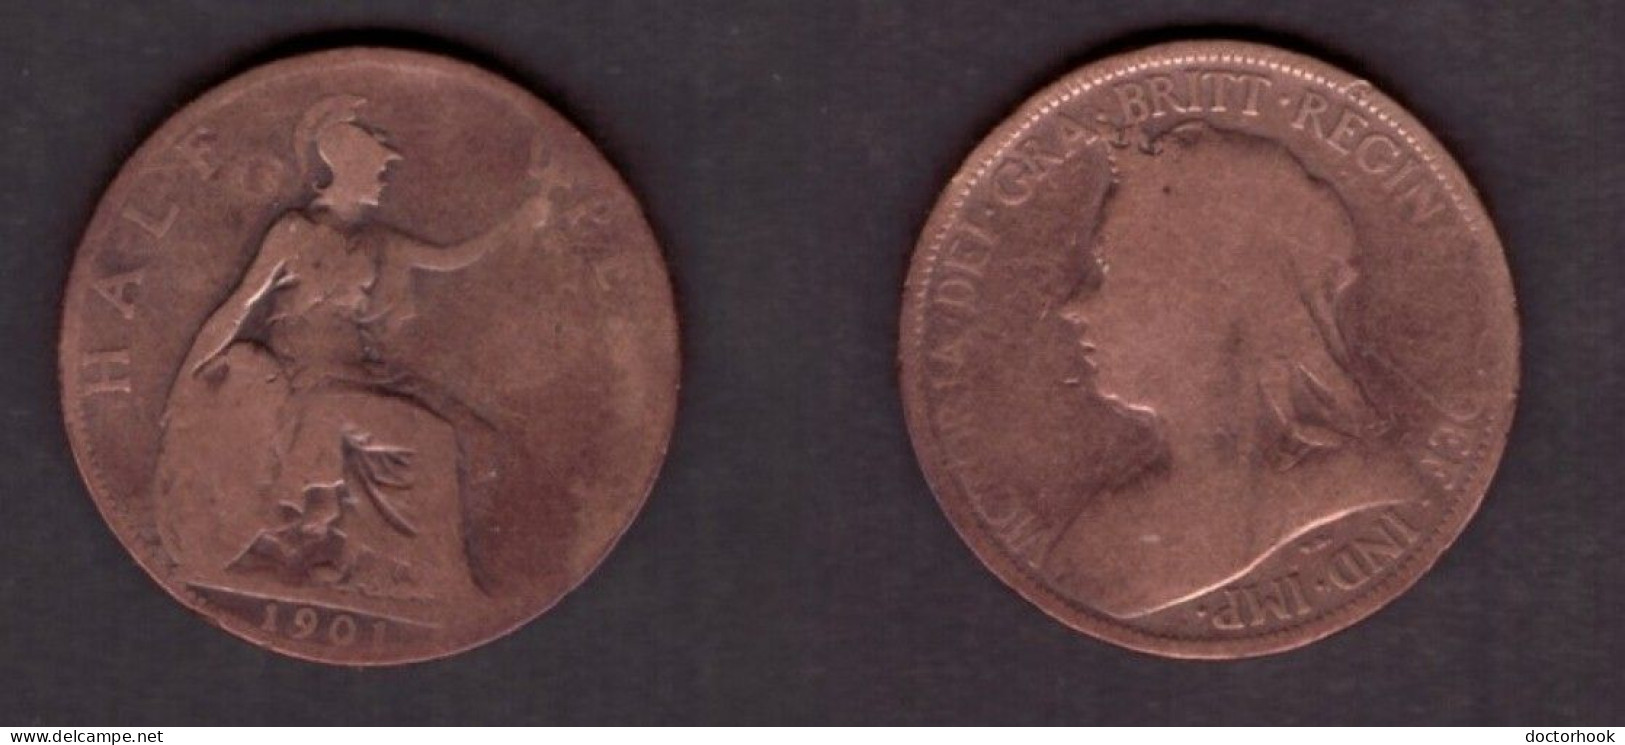 GREAT BRITAIN   1/2 PENNY 1901 (KM # 789) #7415 - C. 1/2 Penny